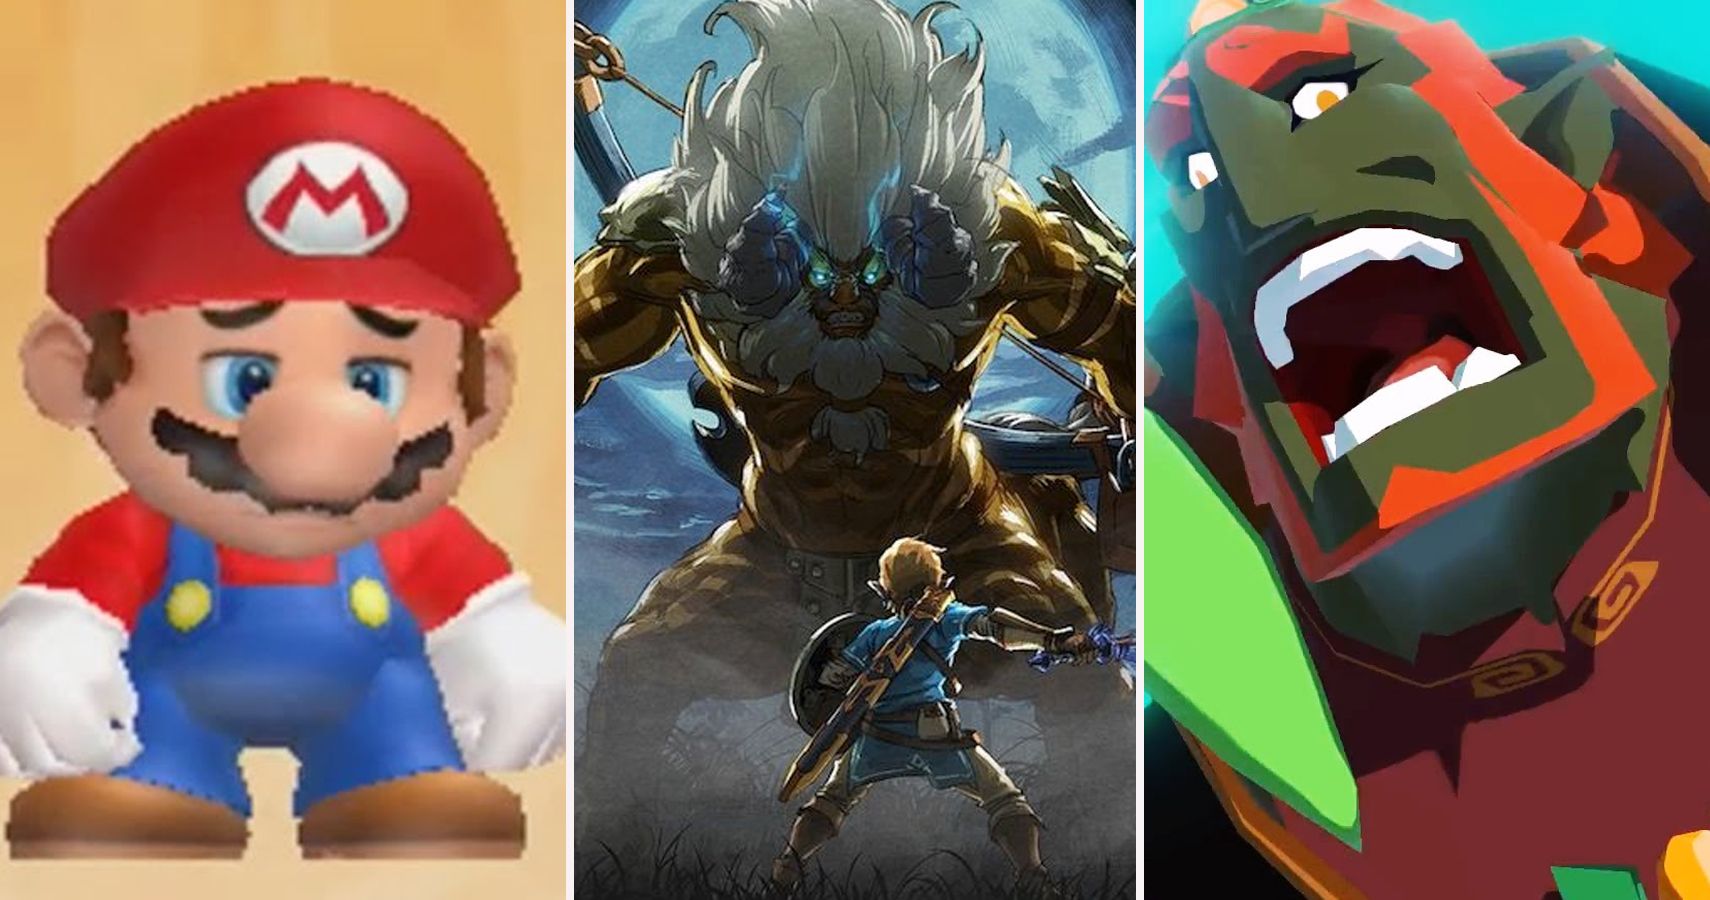 demoler Eléctrico El extraño Ranking Every Wii U Game Published By Nintendo From Worst To Best